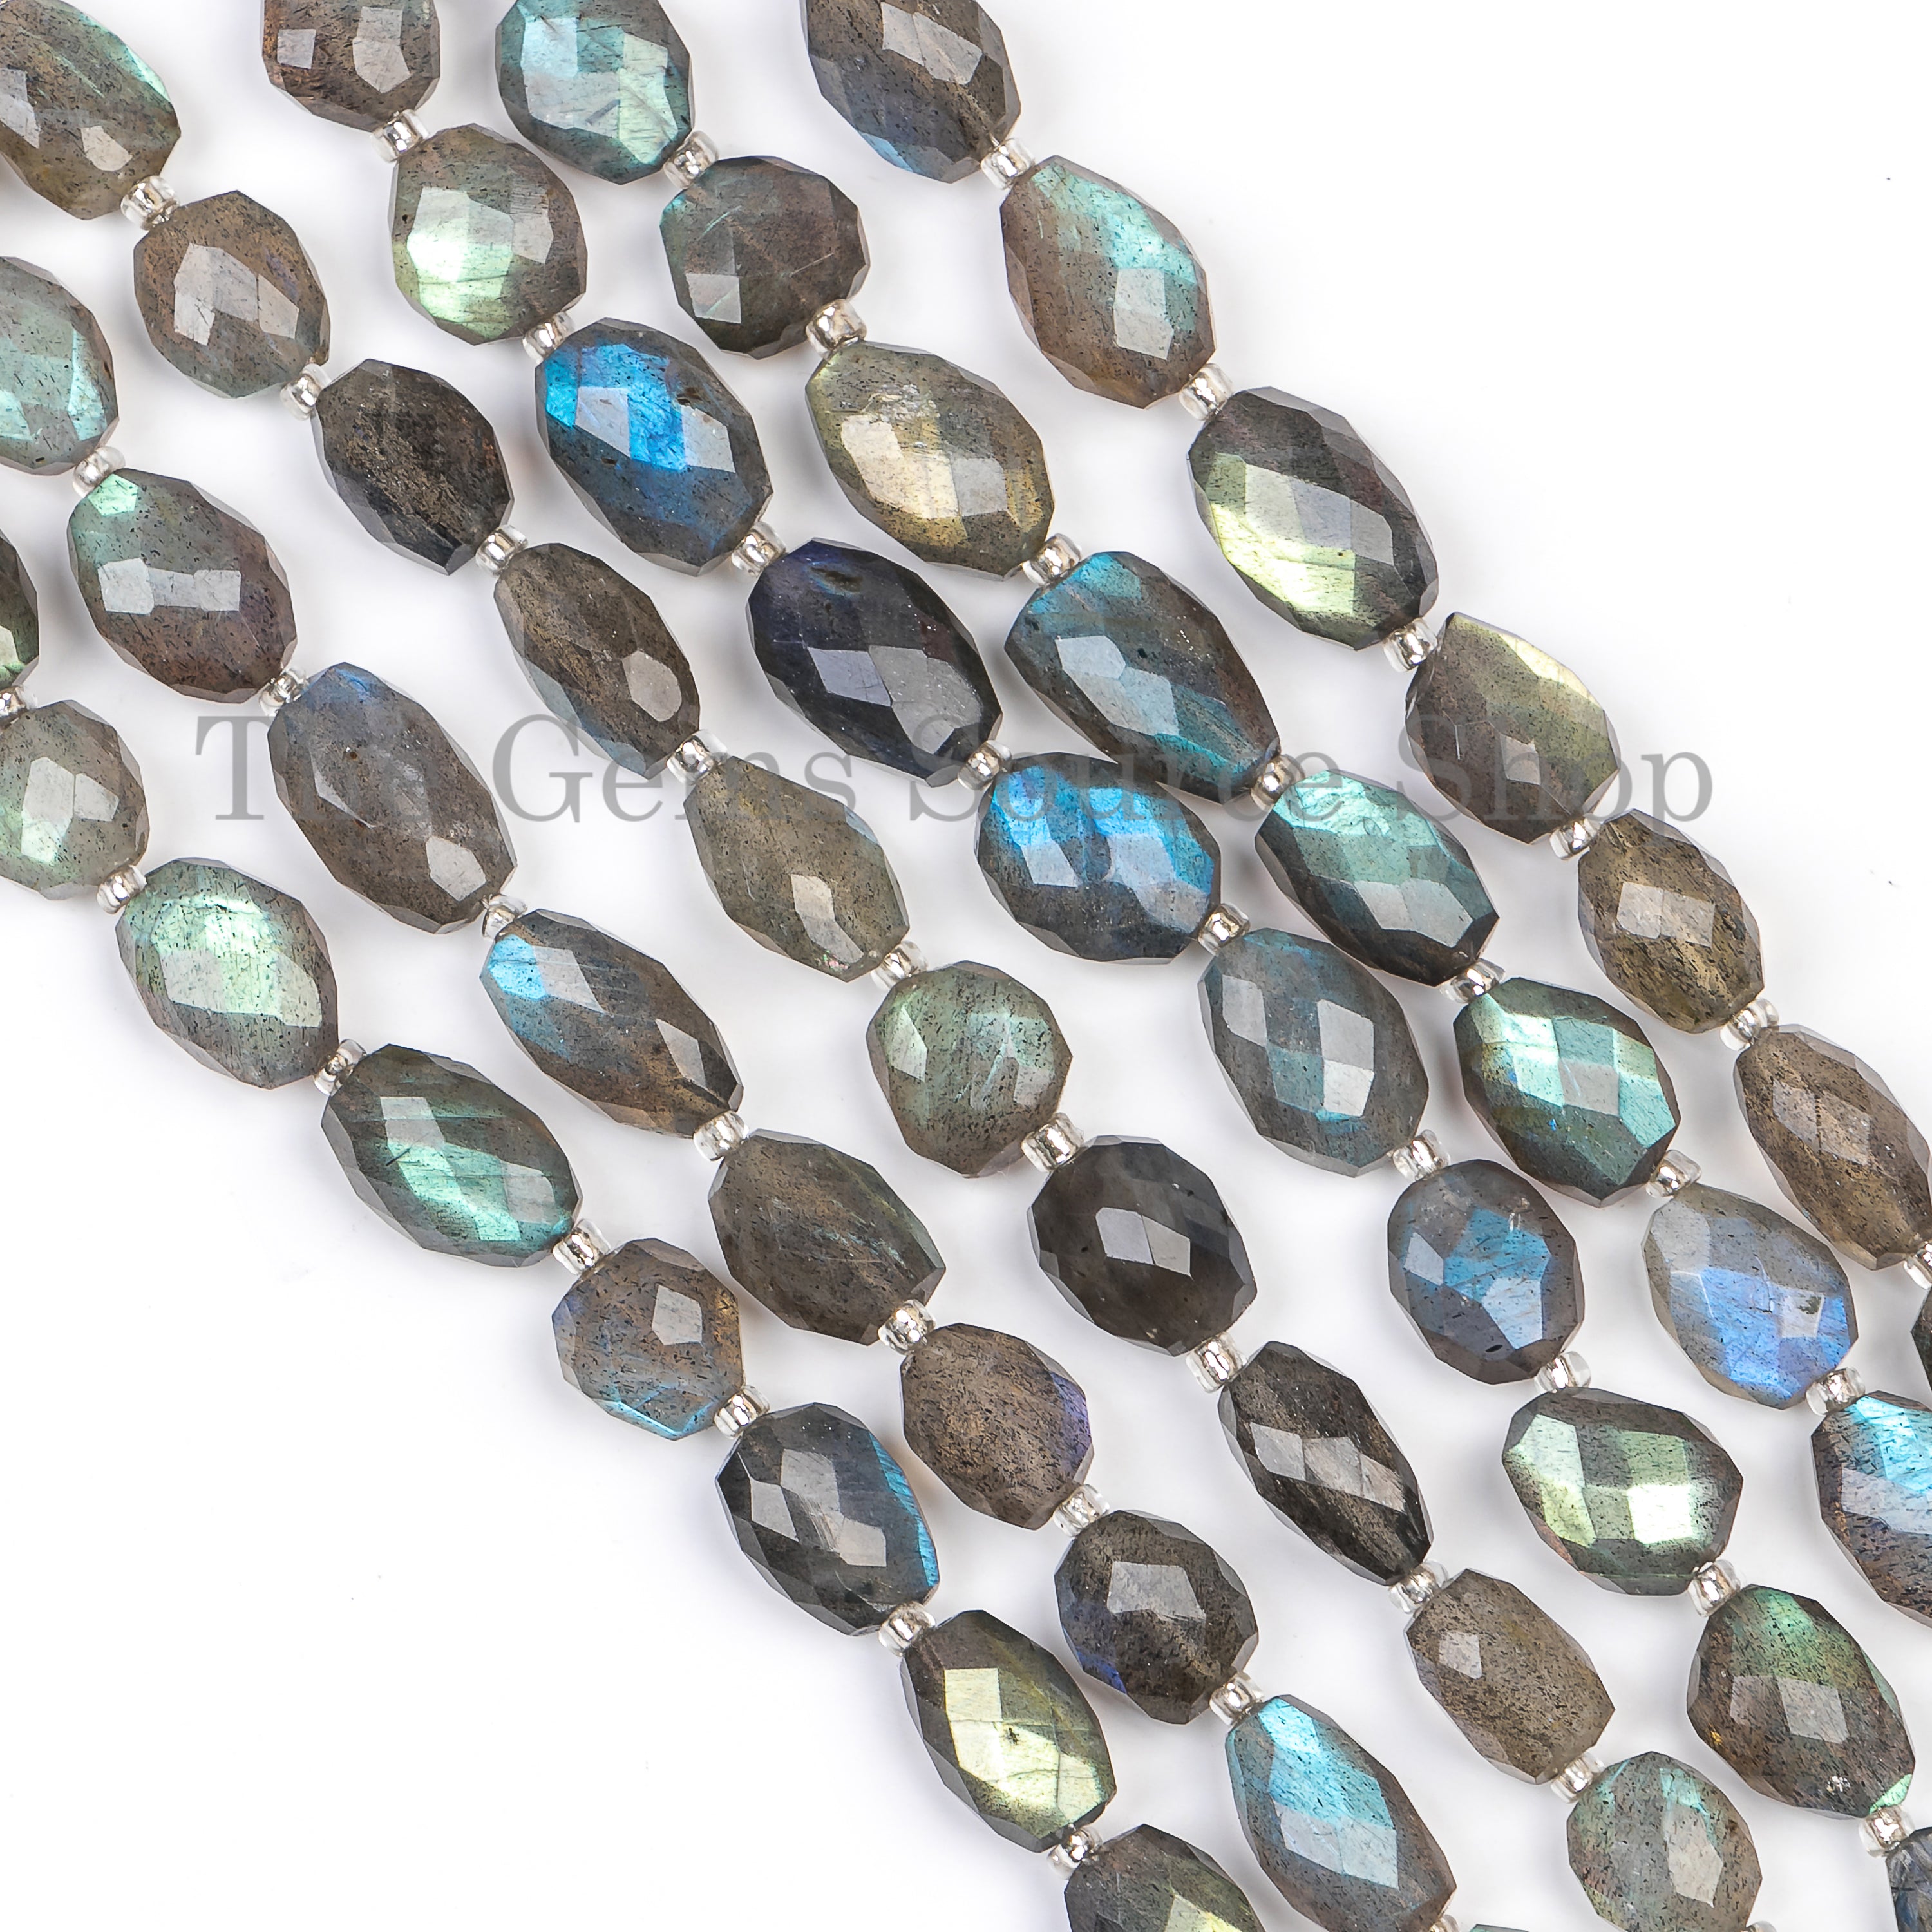 Top Quality Labradorite Faceted Fancy Nugget Beads, Labradorite Nugget Beads